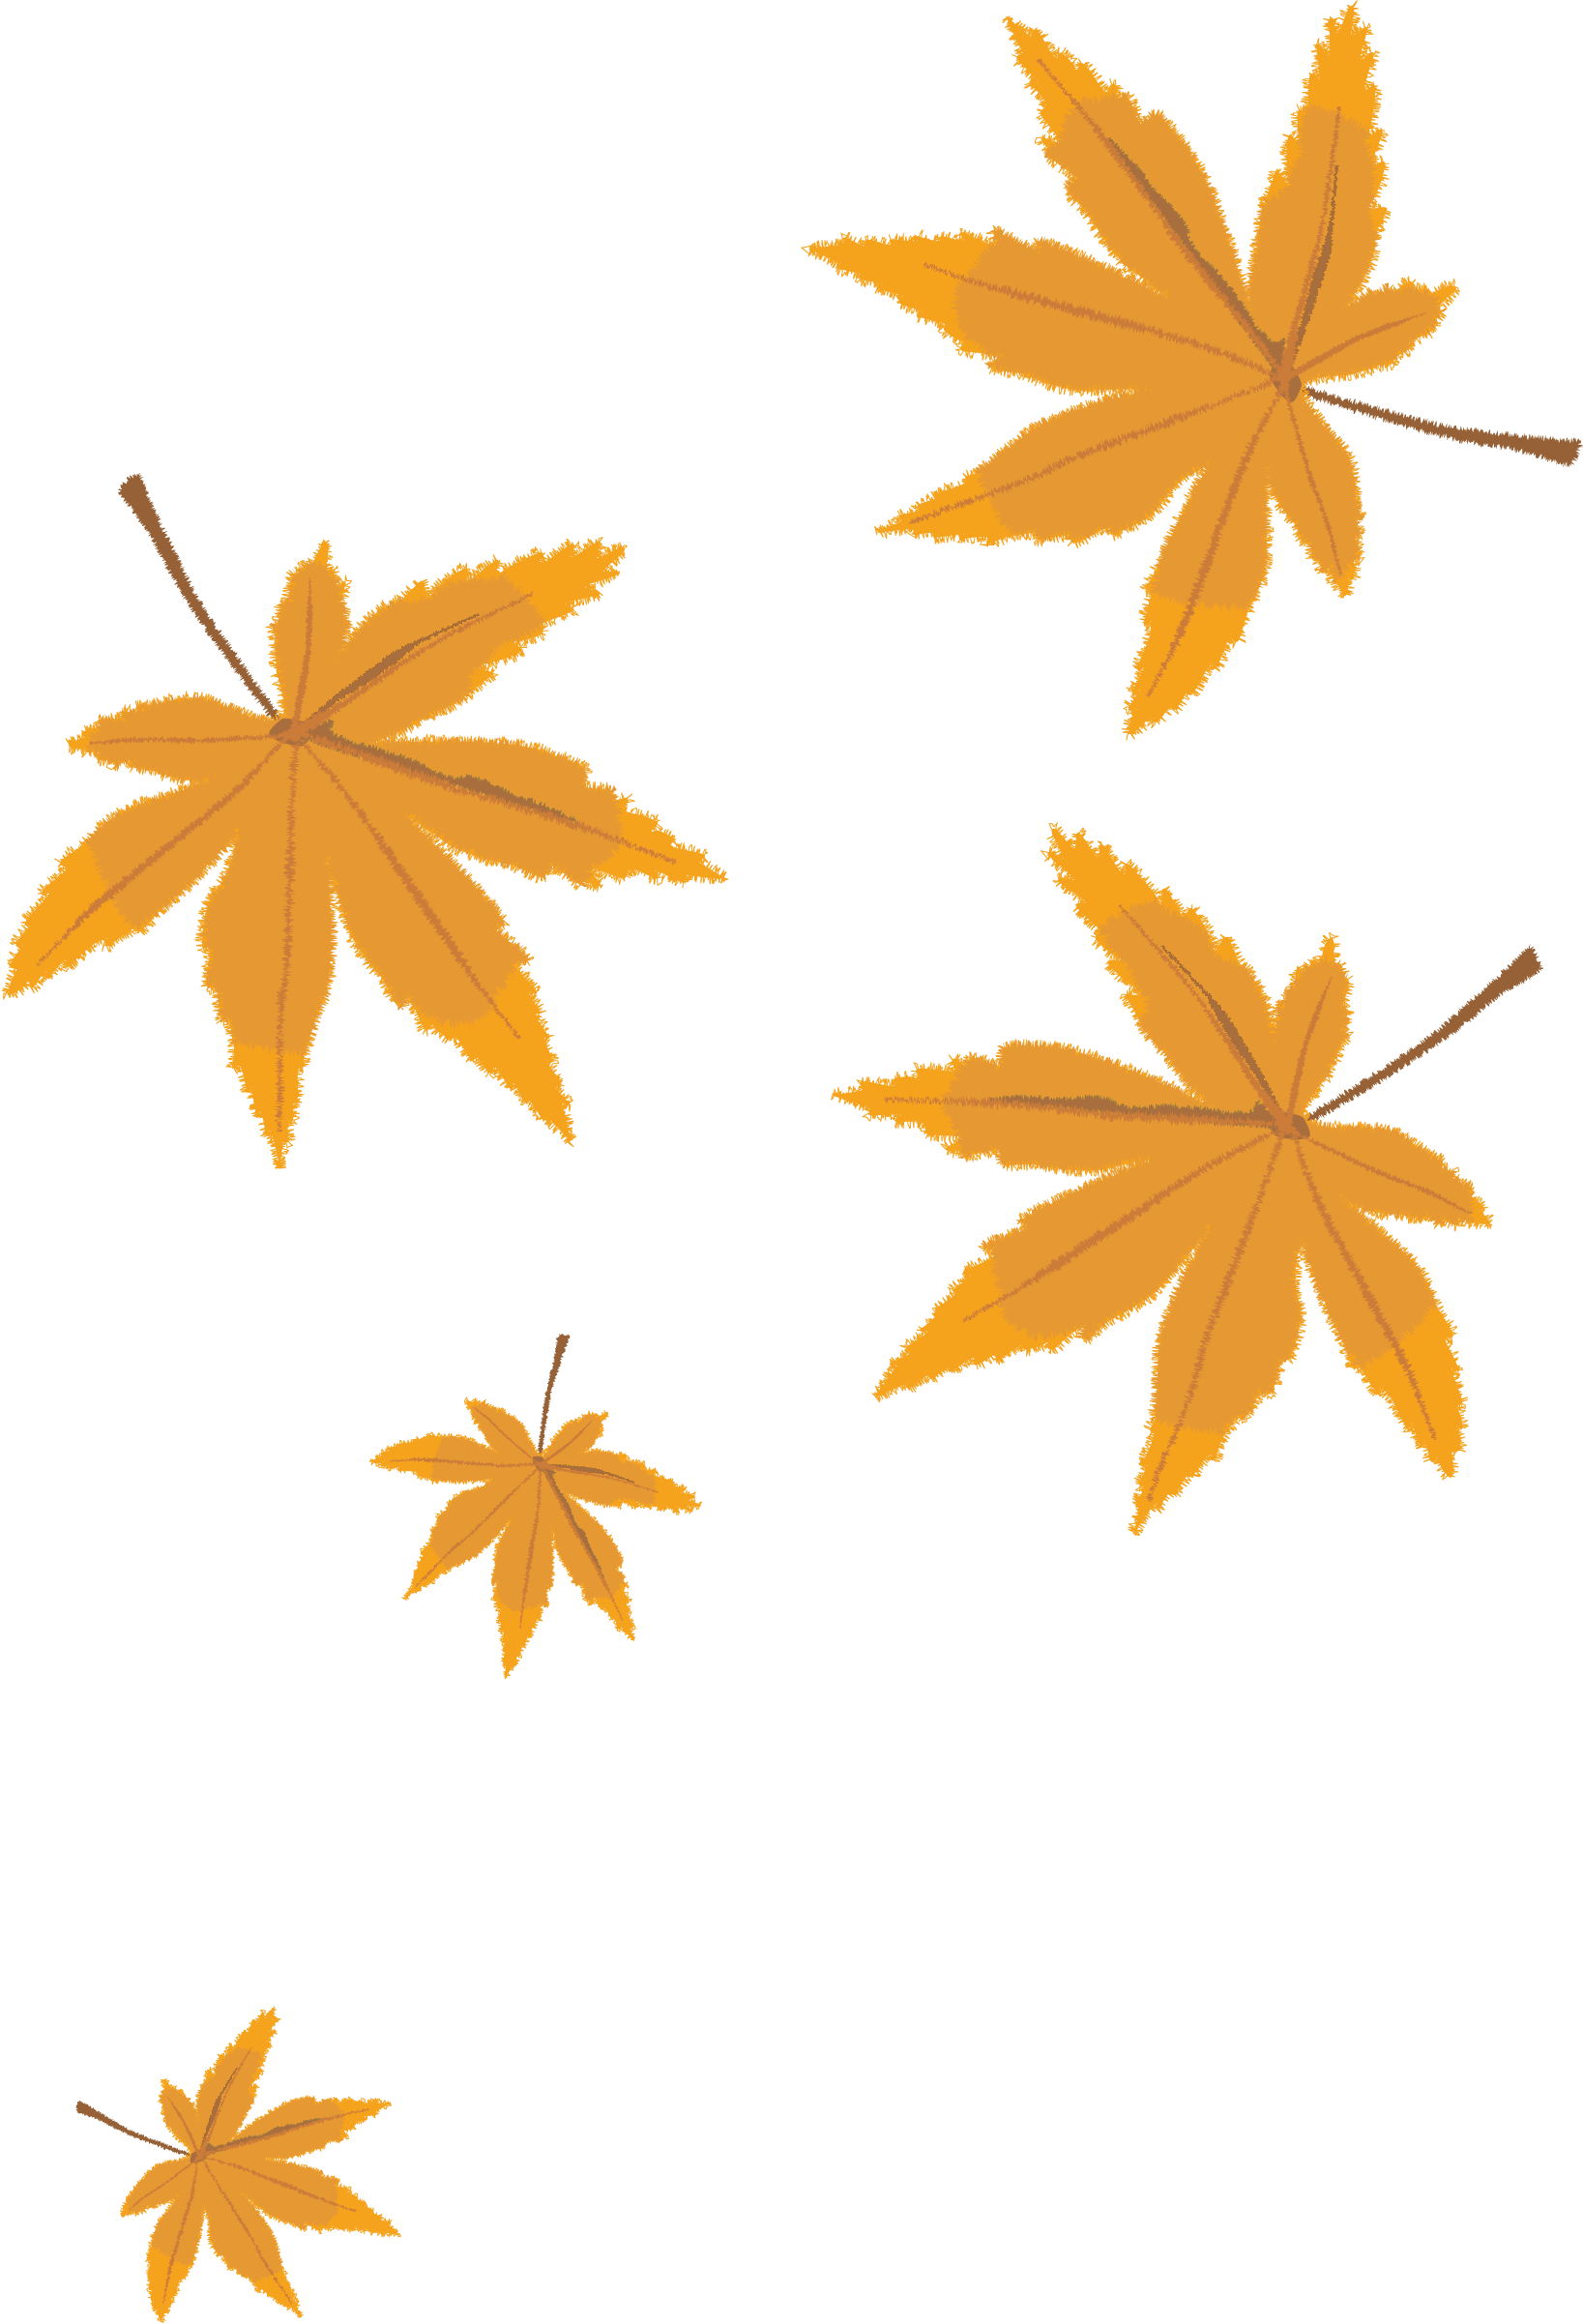 Leaf Cartoon - Autumn leaves png vector material png download - 1637